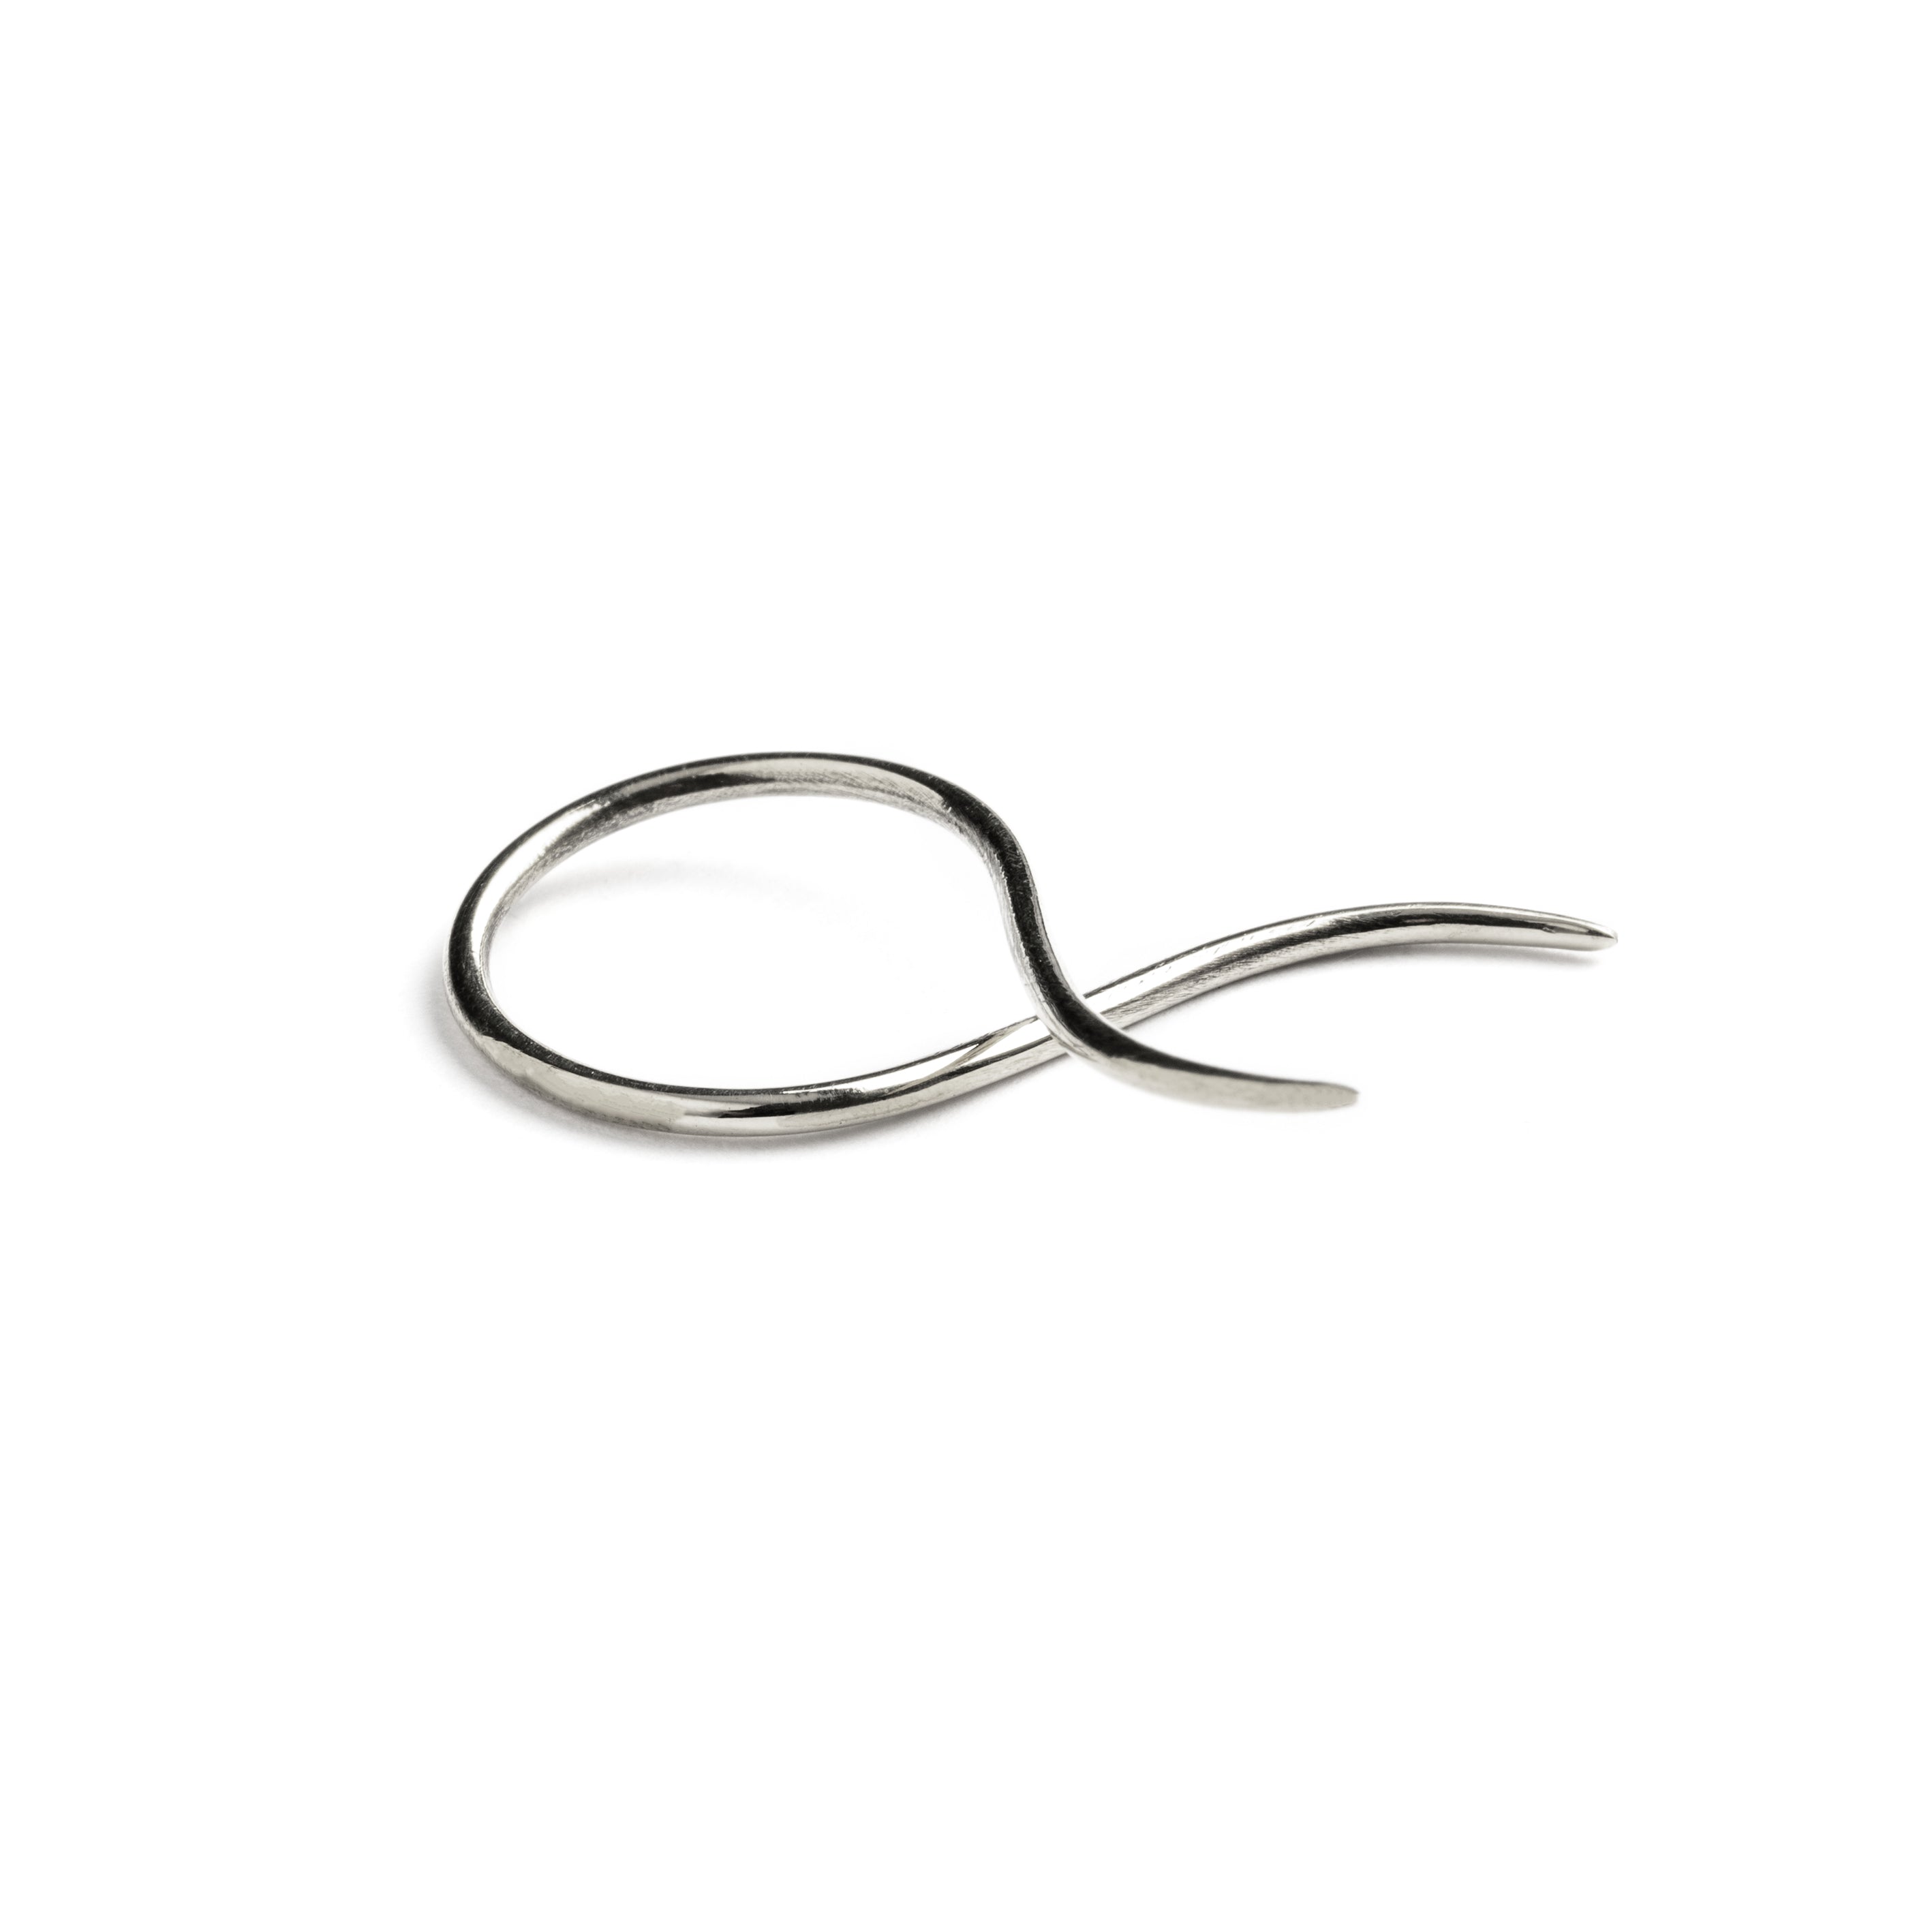 single silver wire twisted curved hook earring front view